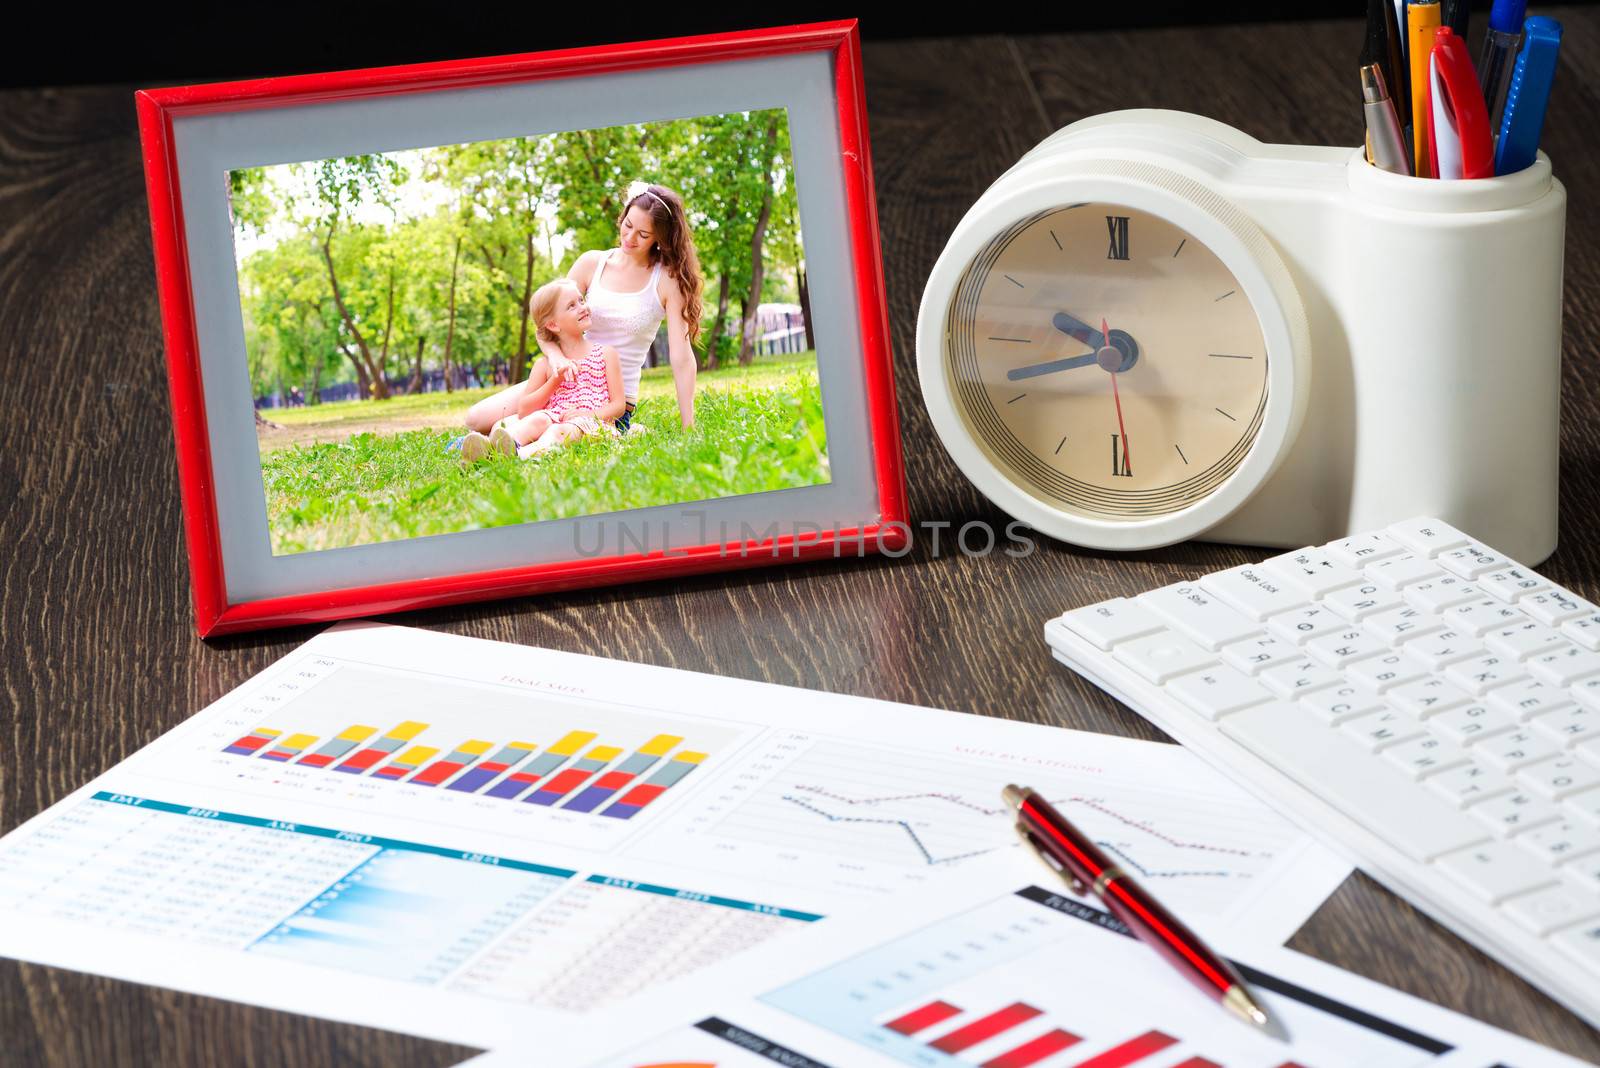 photo frame, business paper with growth graph, table clocks and keyboard. Workplace of the businessman.